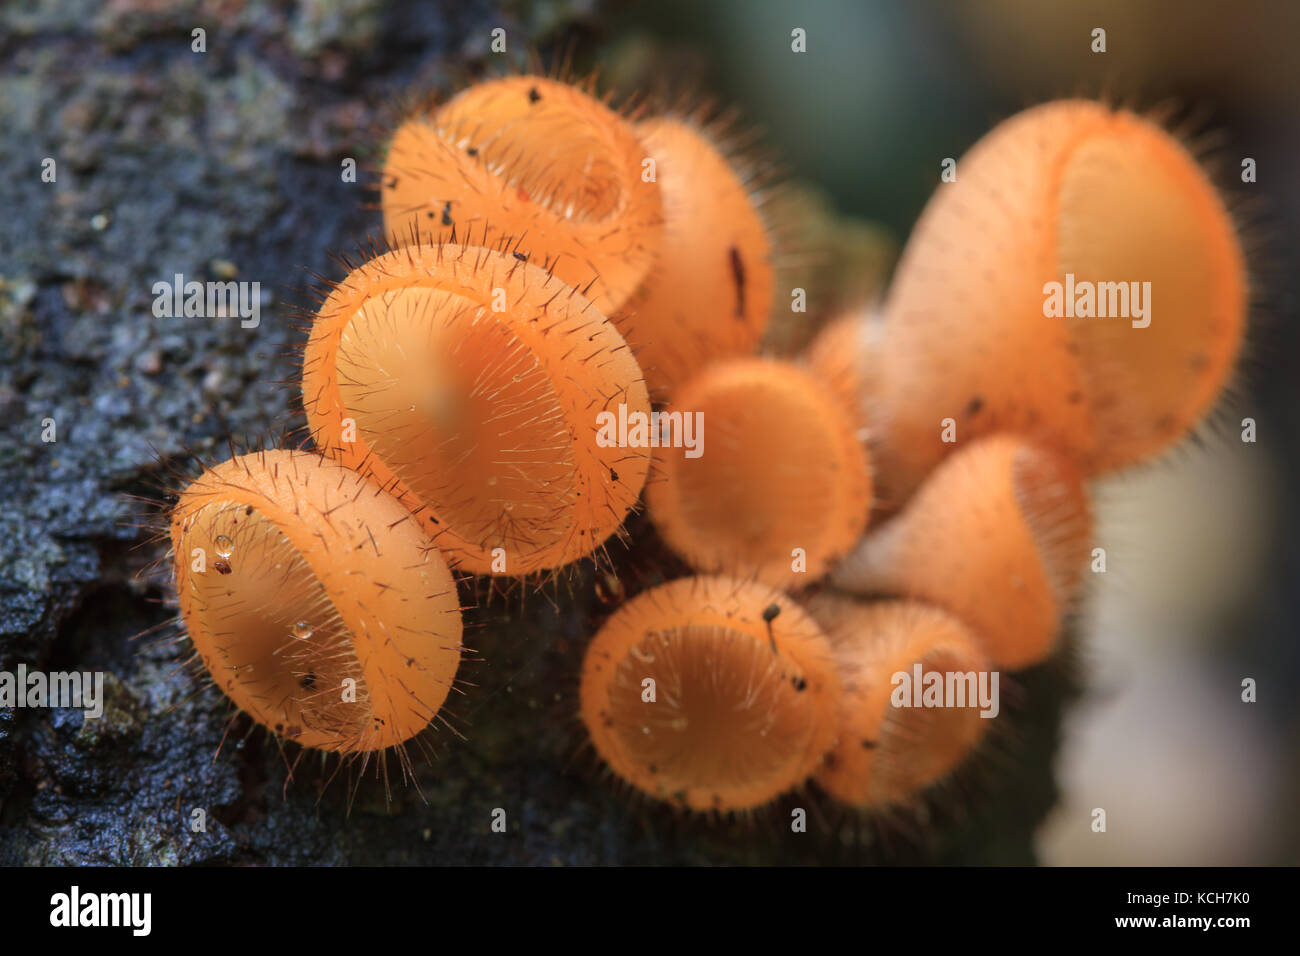 Cookeina tricholoma in rainforest, Colorful mushroom in forest Thailand Stock Photo